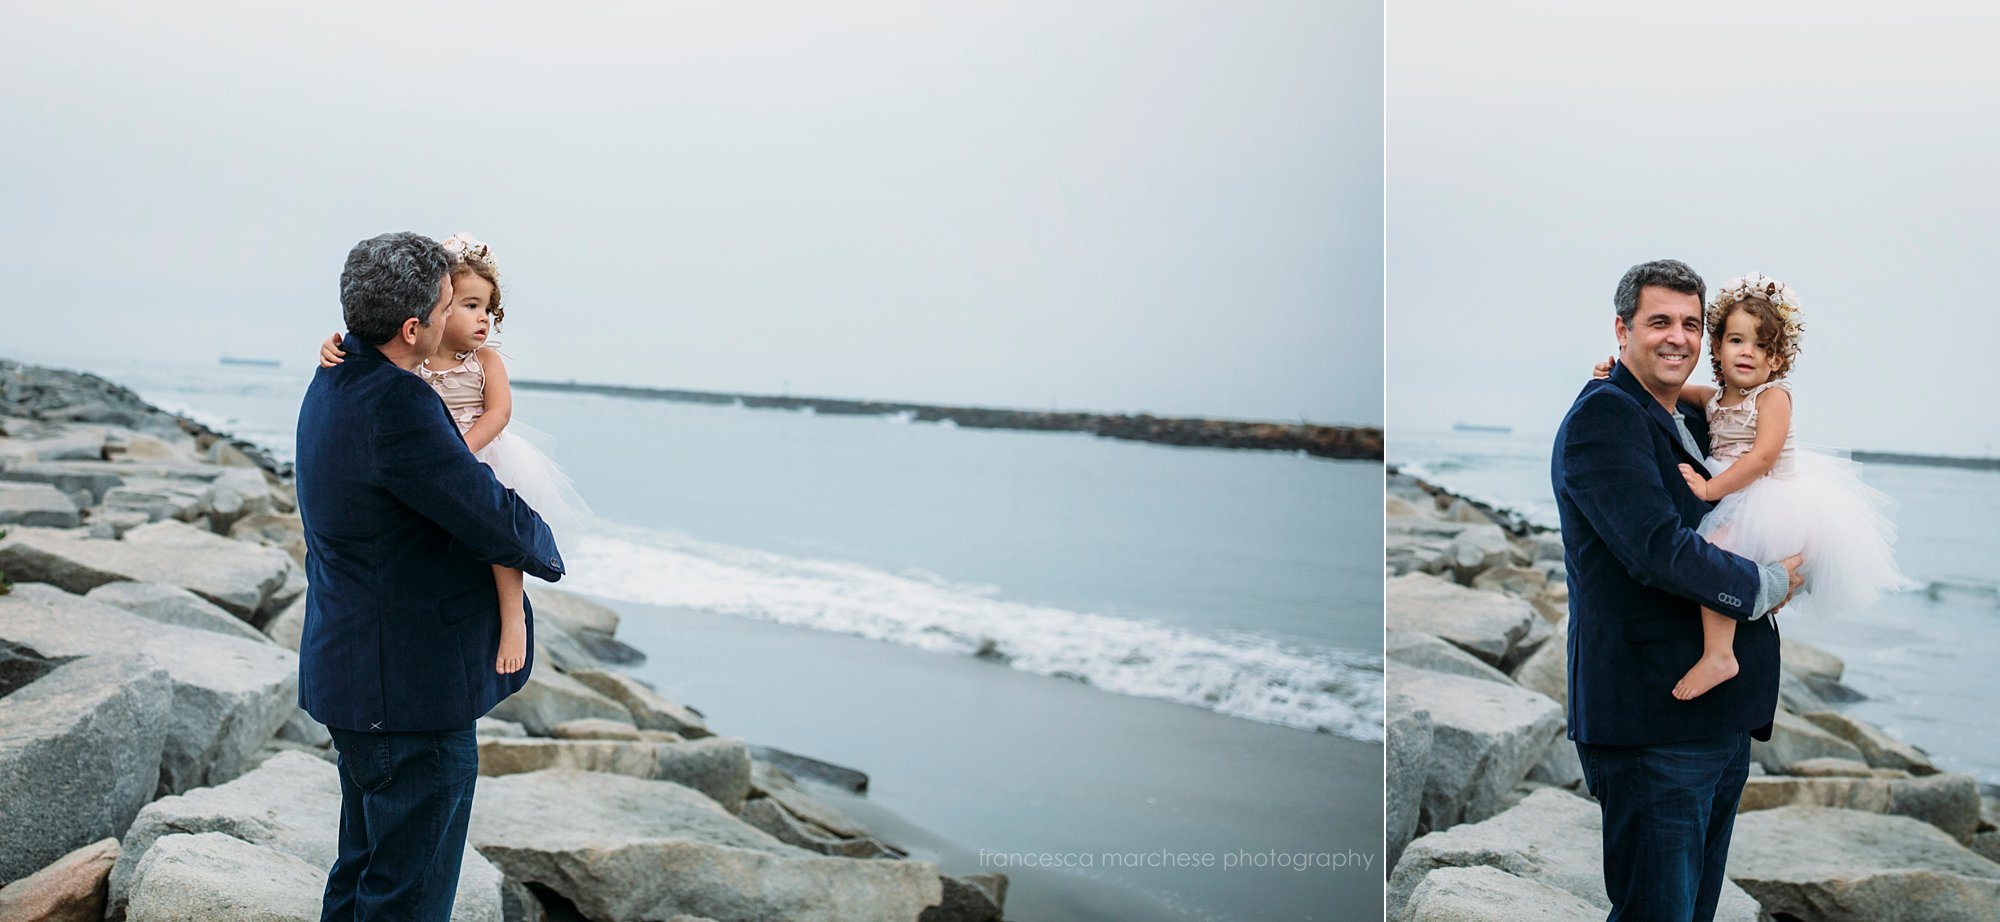 Francesca Marchese Photography - Family Photographer Starkman Family sunset beach session - dad and daughter